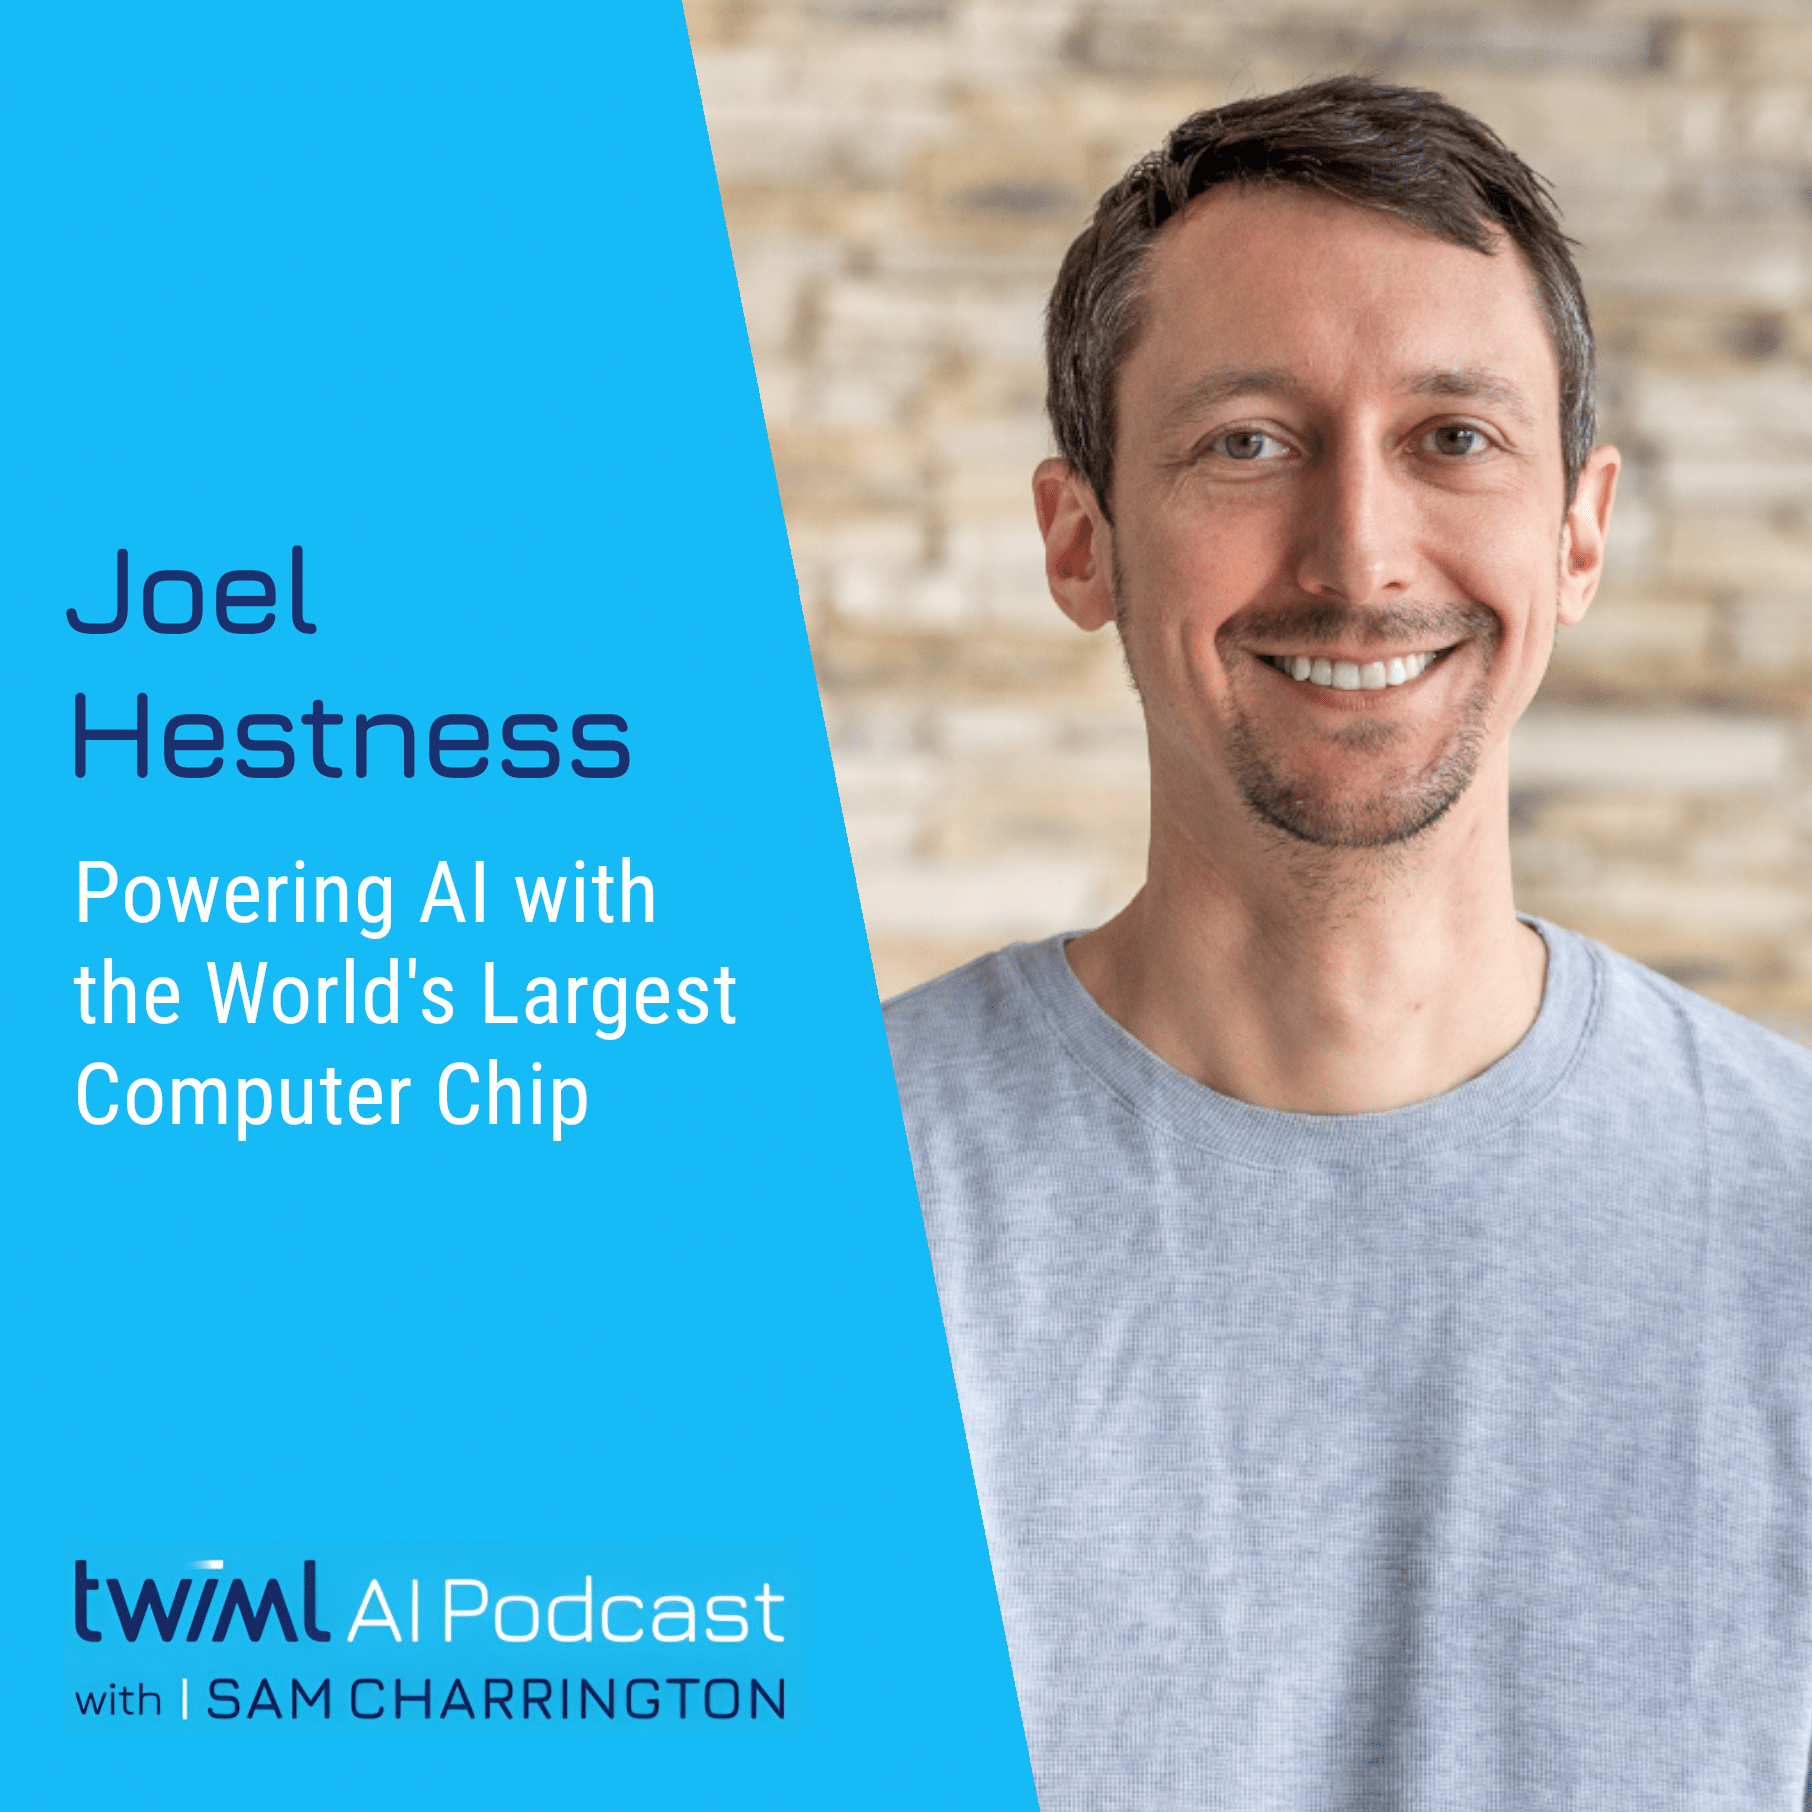 twiml-joel-hestness-powering-ai-with-the-worlds-largest-computer-chip-sq